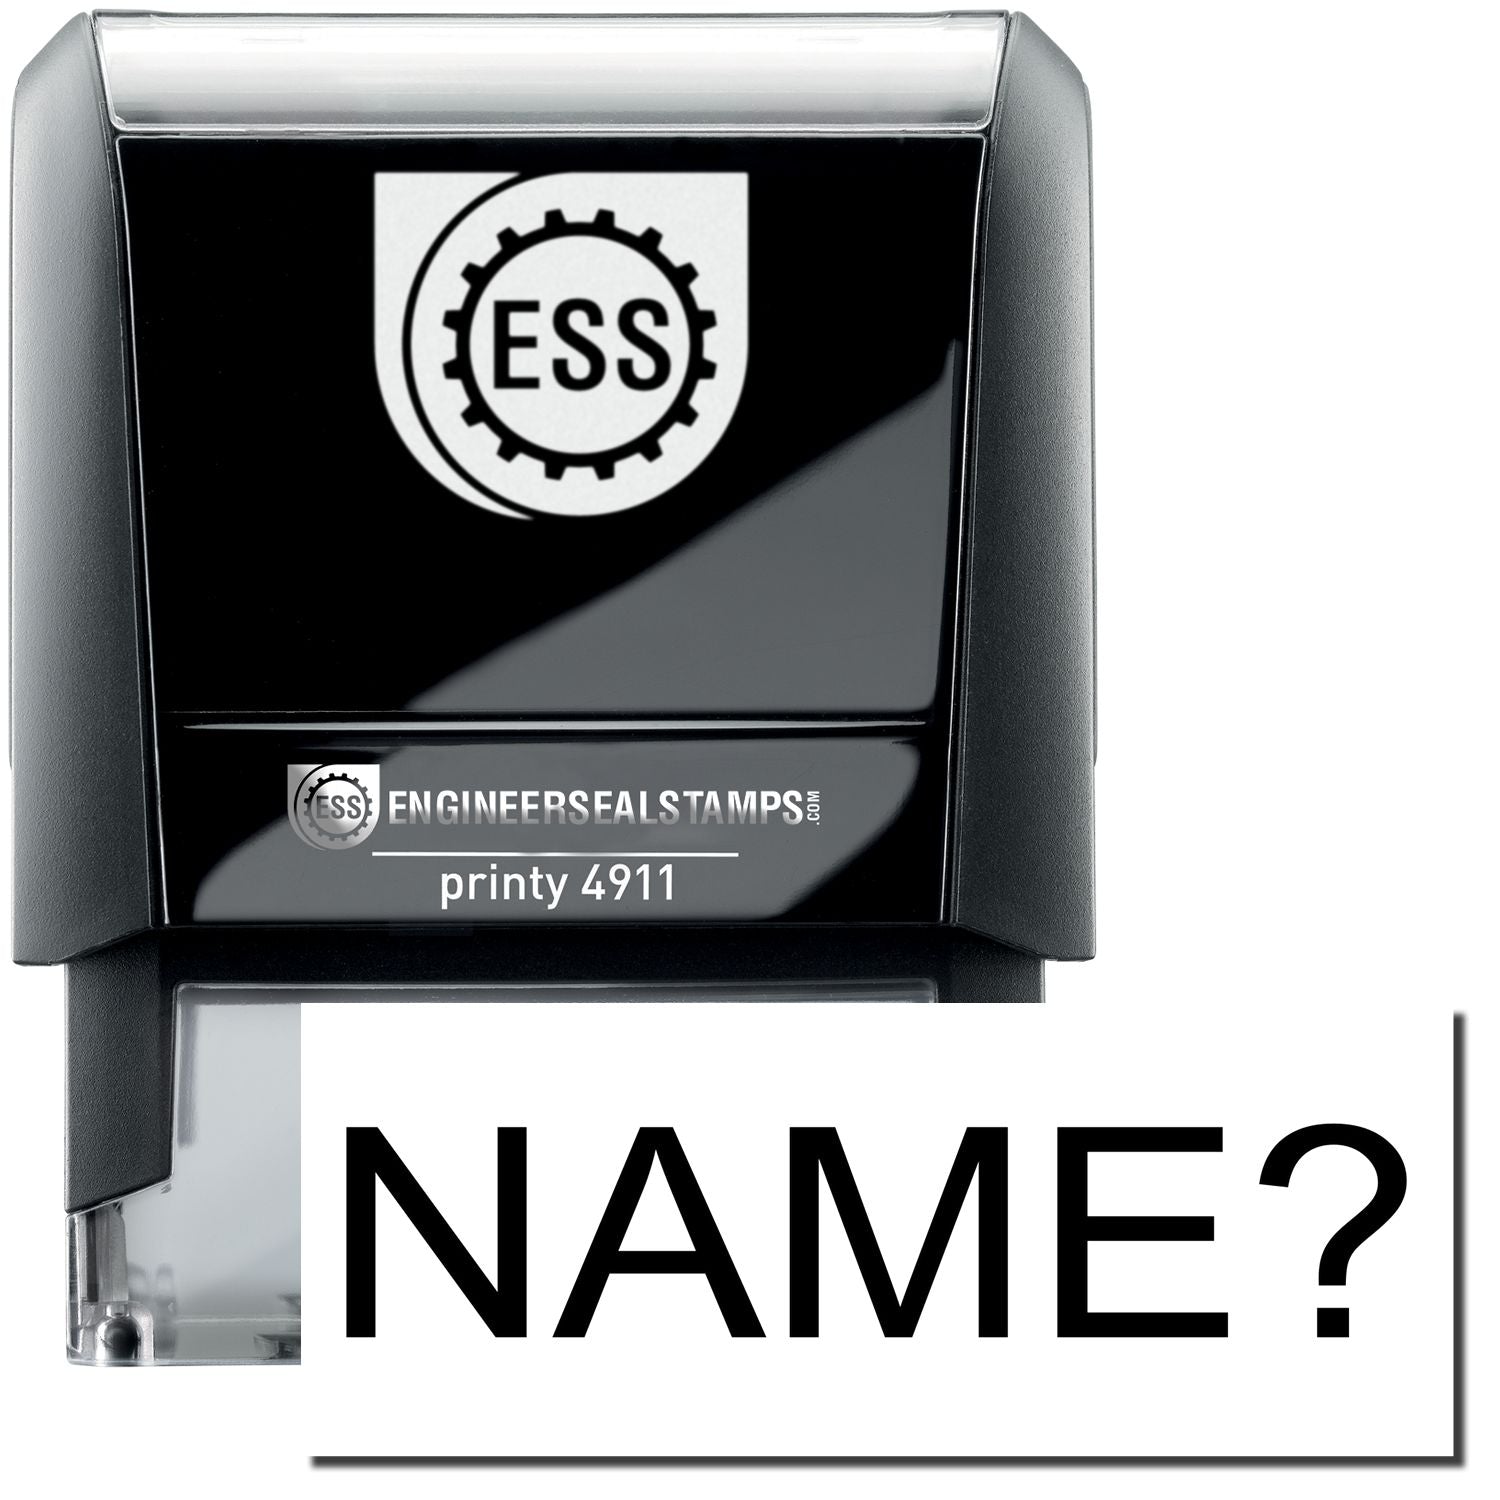 A self-inking stamp with a stamped image showing how the text "NAME ?" is displayed after stamping.